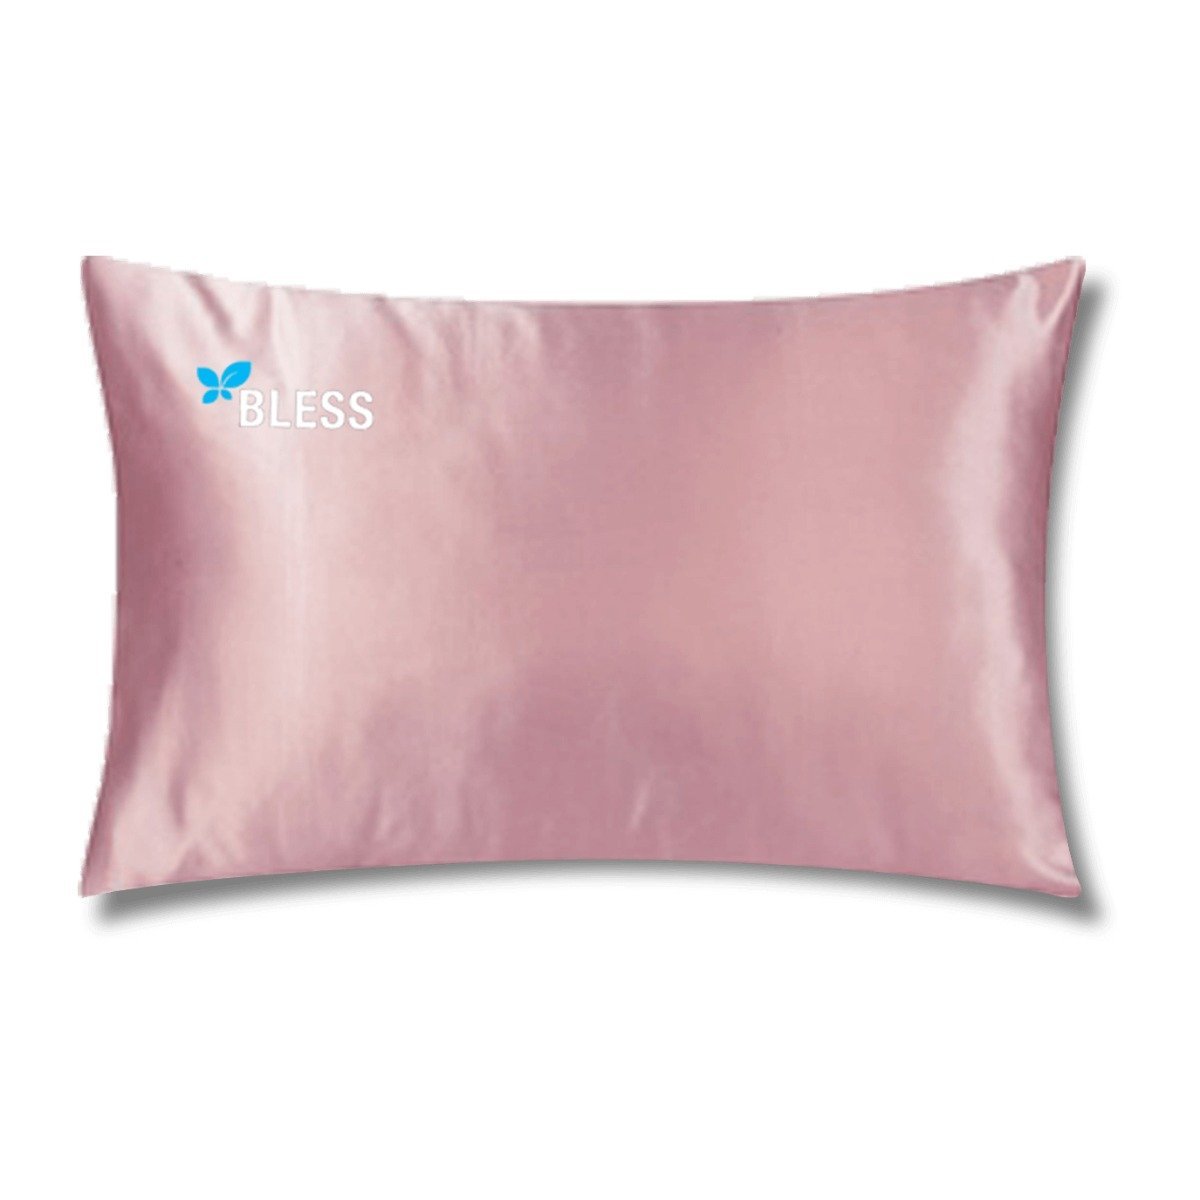 Bless Satin Pillowcase Pink Cashmere - Bloom Pharmacy